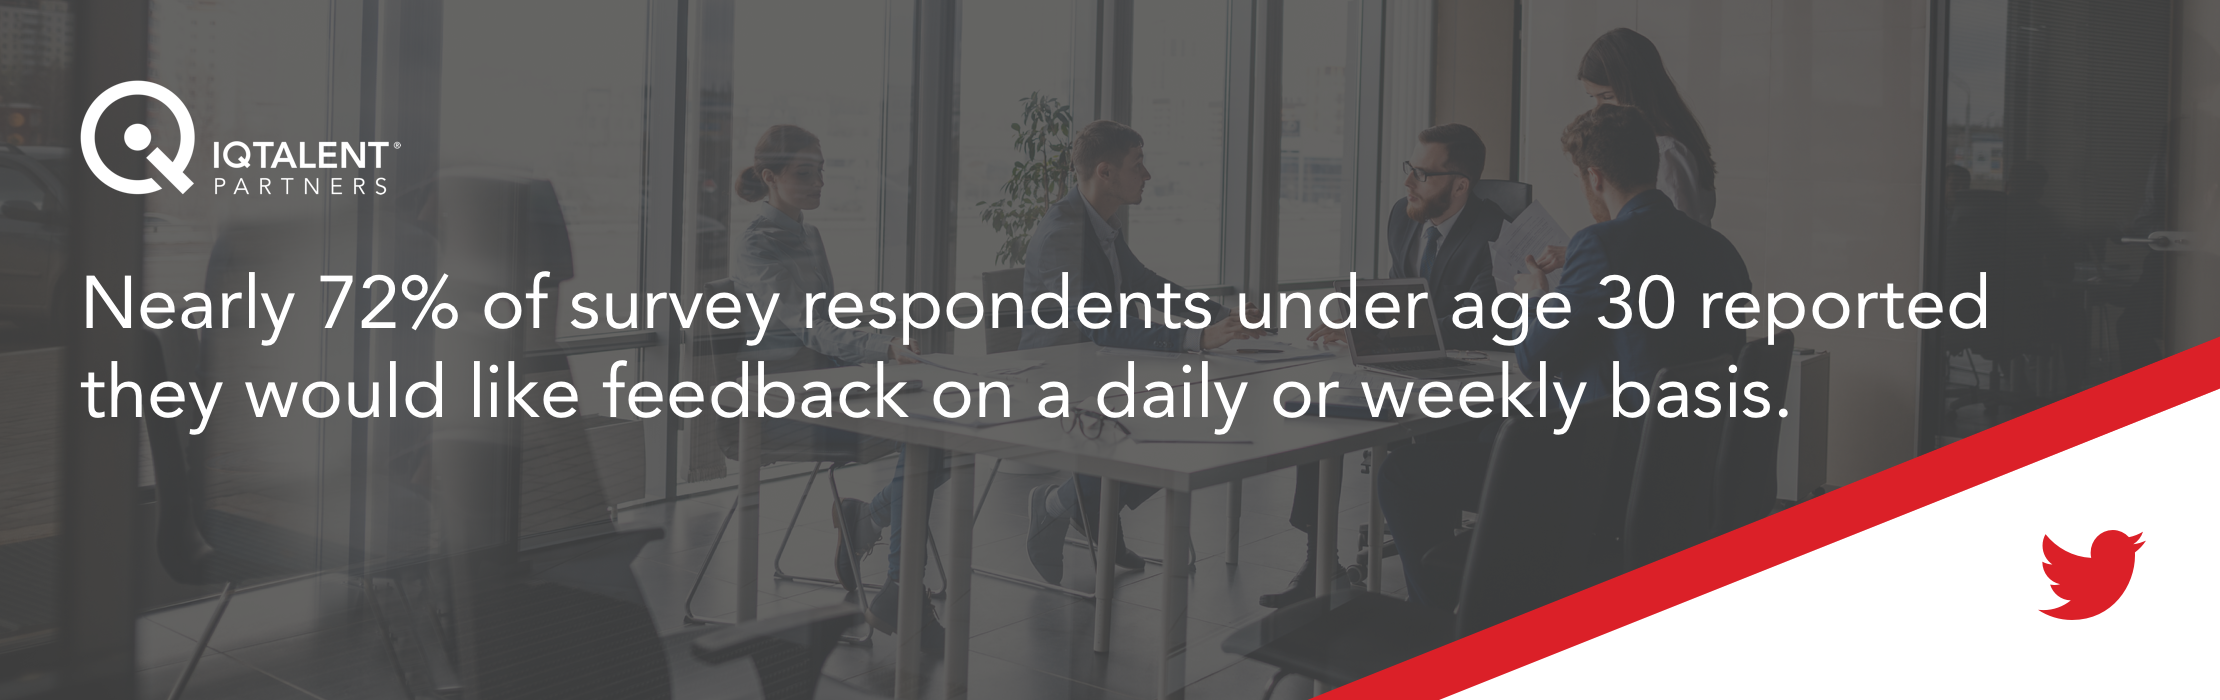 Nearly 72% of survey respondents under age 30 reported they would like feedback on a daily or weekly basis.